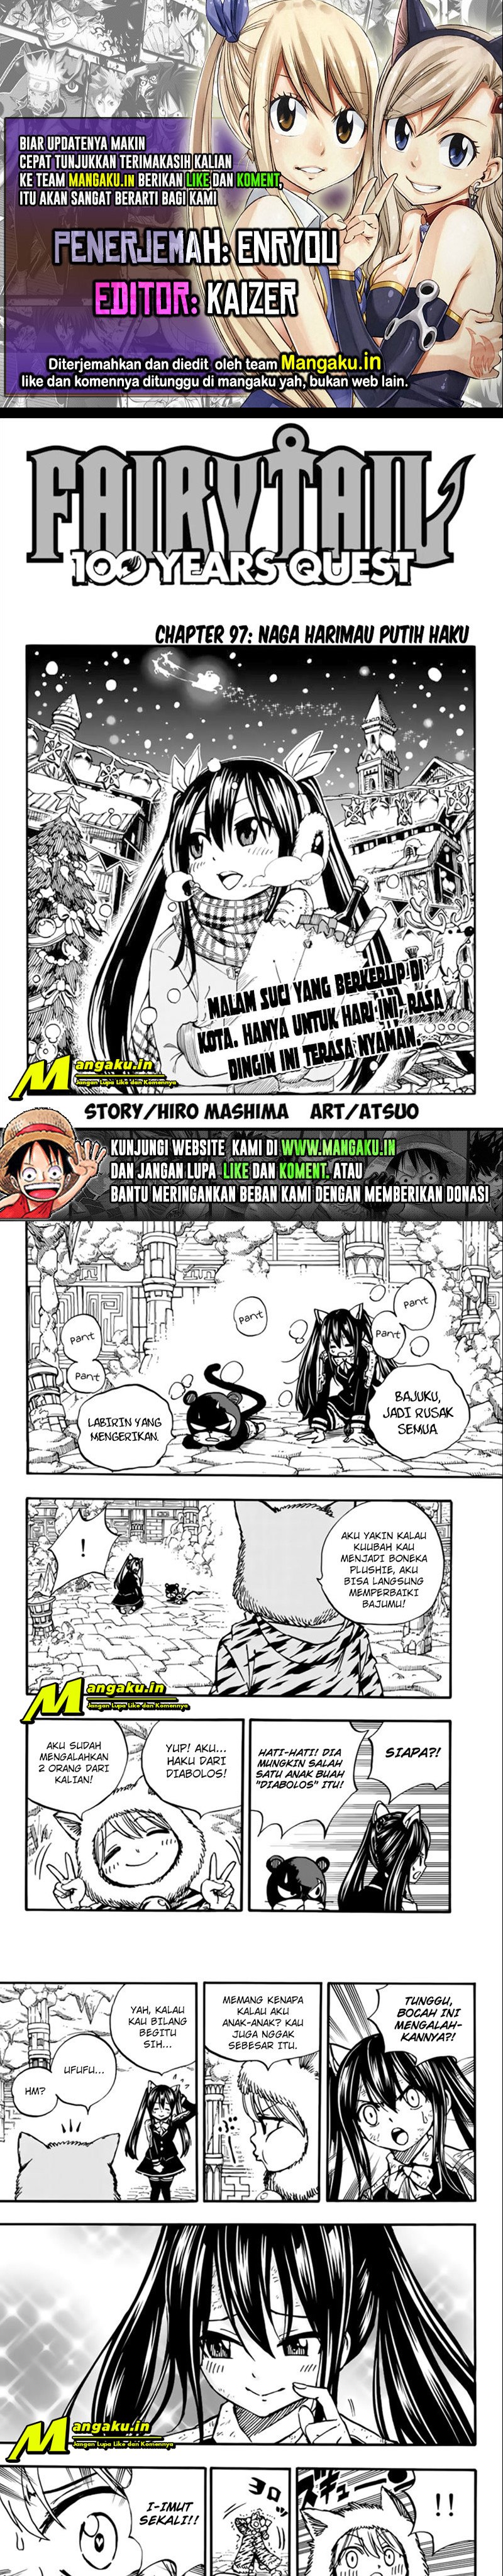 Fairy Tail: 100 Years Quest: Chapter 97 - Page 1